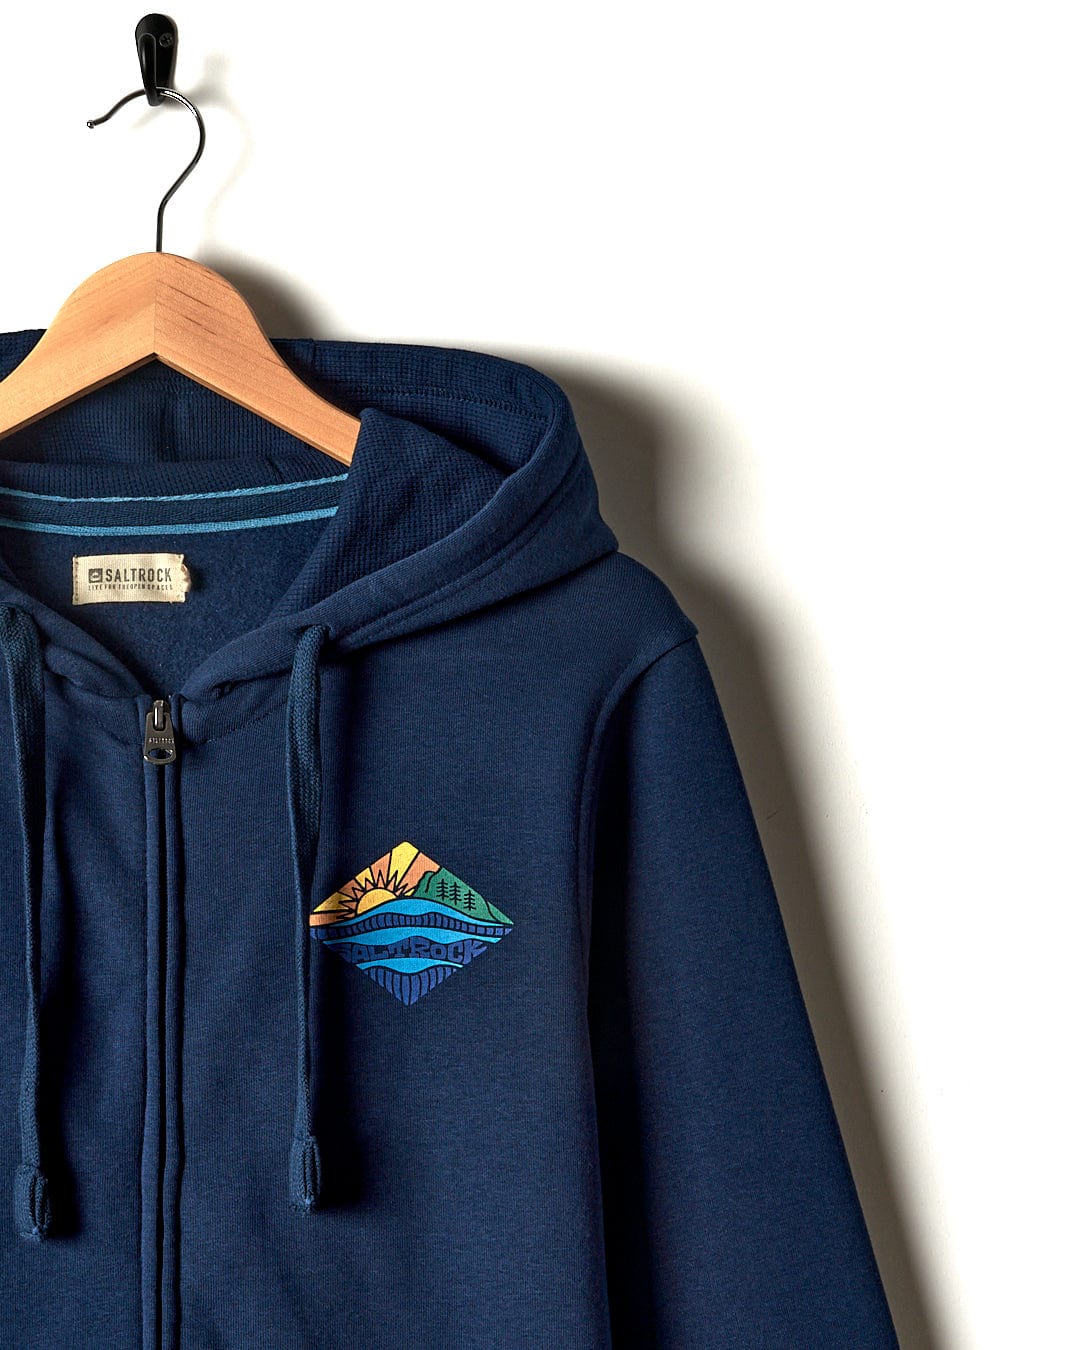 A Diamond Scene - Mens Zip Hoodie - Blue with a mountain embroidered on it by Saltrock.